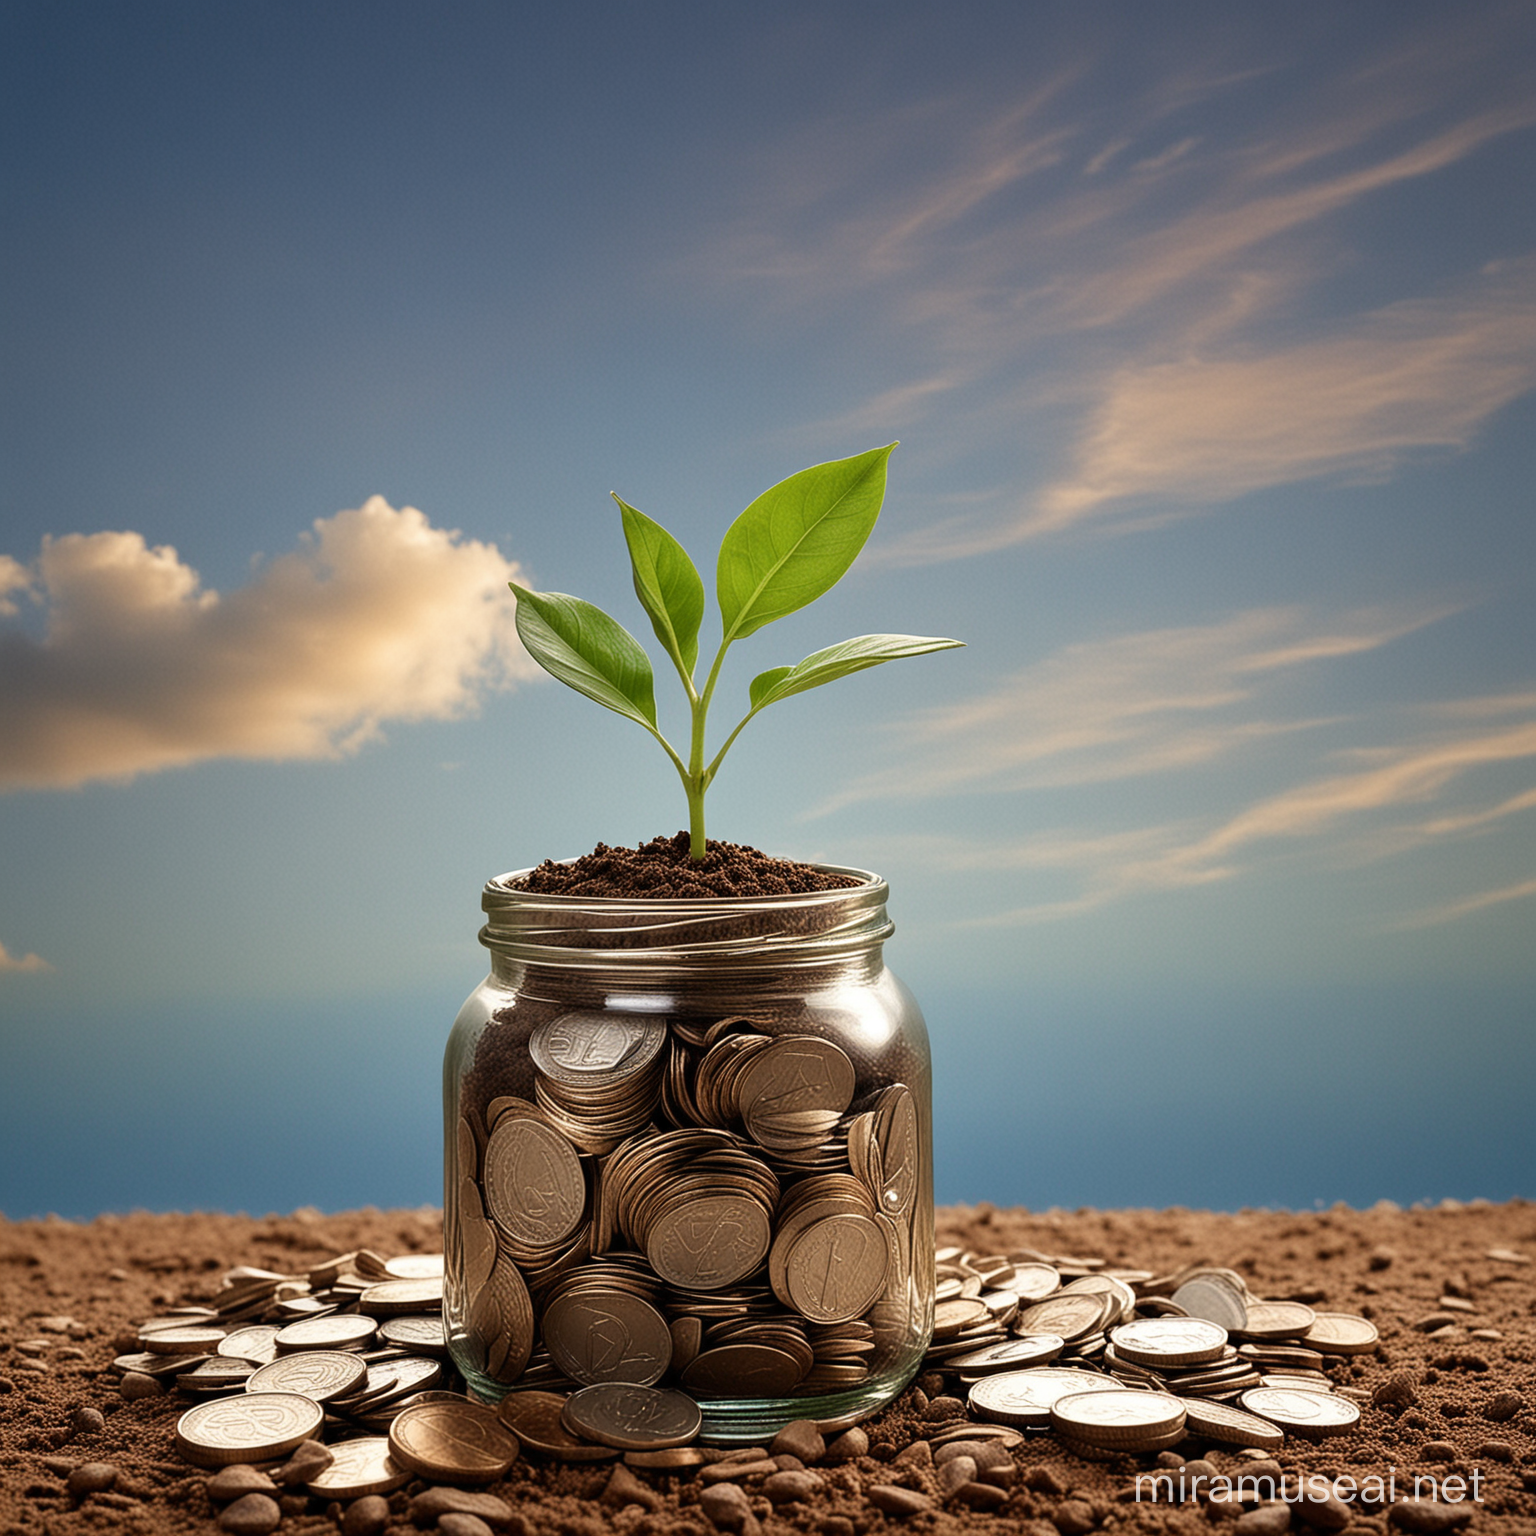  Imagine a visual metaphor for financial growth and sustainability. A small plant sprouts from a clear glass jar filled with coins and bills, symbolizing investment and the nurturing of wealth. The jar sits on top of a cross-section of soil, showcasing layers of earth and grass, hinting at the organic growth of assets. Around the jar, more coins are scattered on the ground, perhaps signifying lost or unused potential. The background is a serene sky, transitioning from the clear blue of a hopeful day to the soft hues of dawn or dusk, suggesting the passage of time in the journey of financial growth. This image is a creative representation of the concept 'money doesn't grow on trees,' but with care and patience, financial prosperity can flourish like a well-tended garden. The whole composition is vibrant and filled with hope, rendered in high detail, suggesting that through diligent savings and investments, one's financial goals can be achieved.